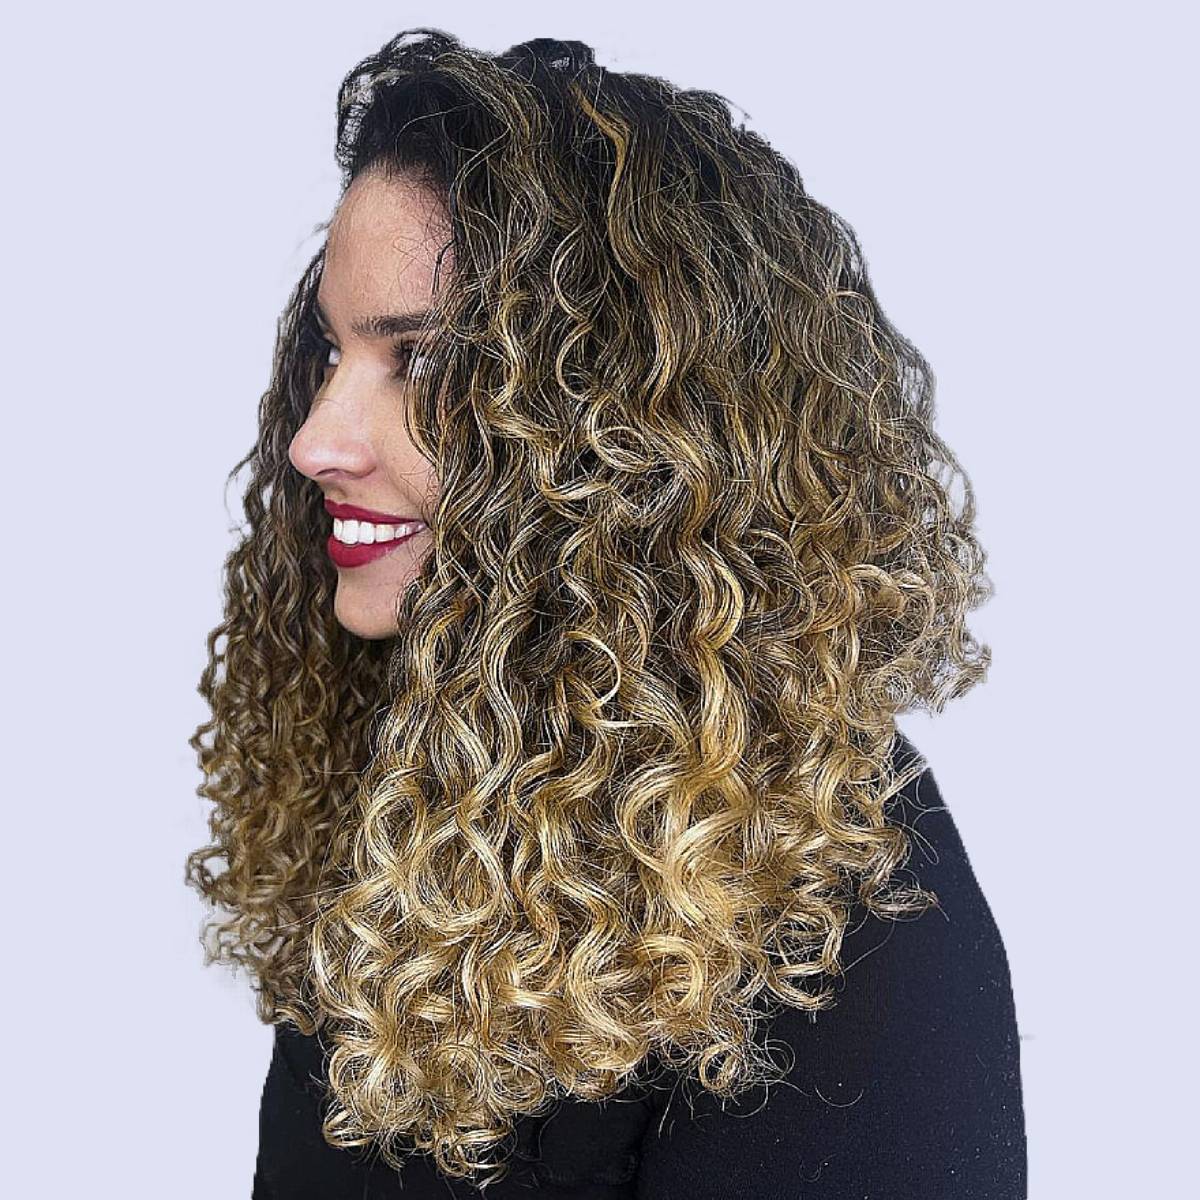 Best Curly Hair Color Trends For 2021 | Anushka Spa & Salon